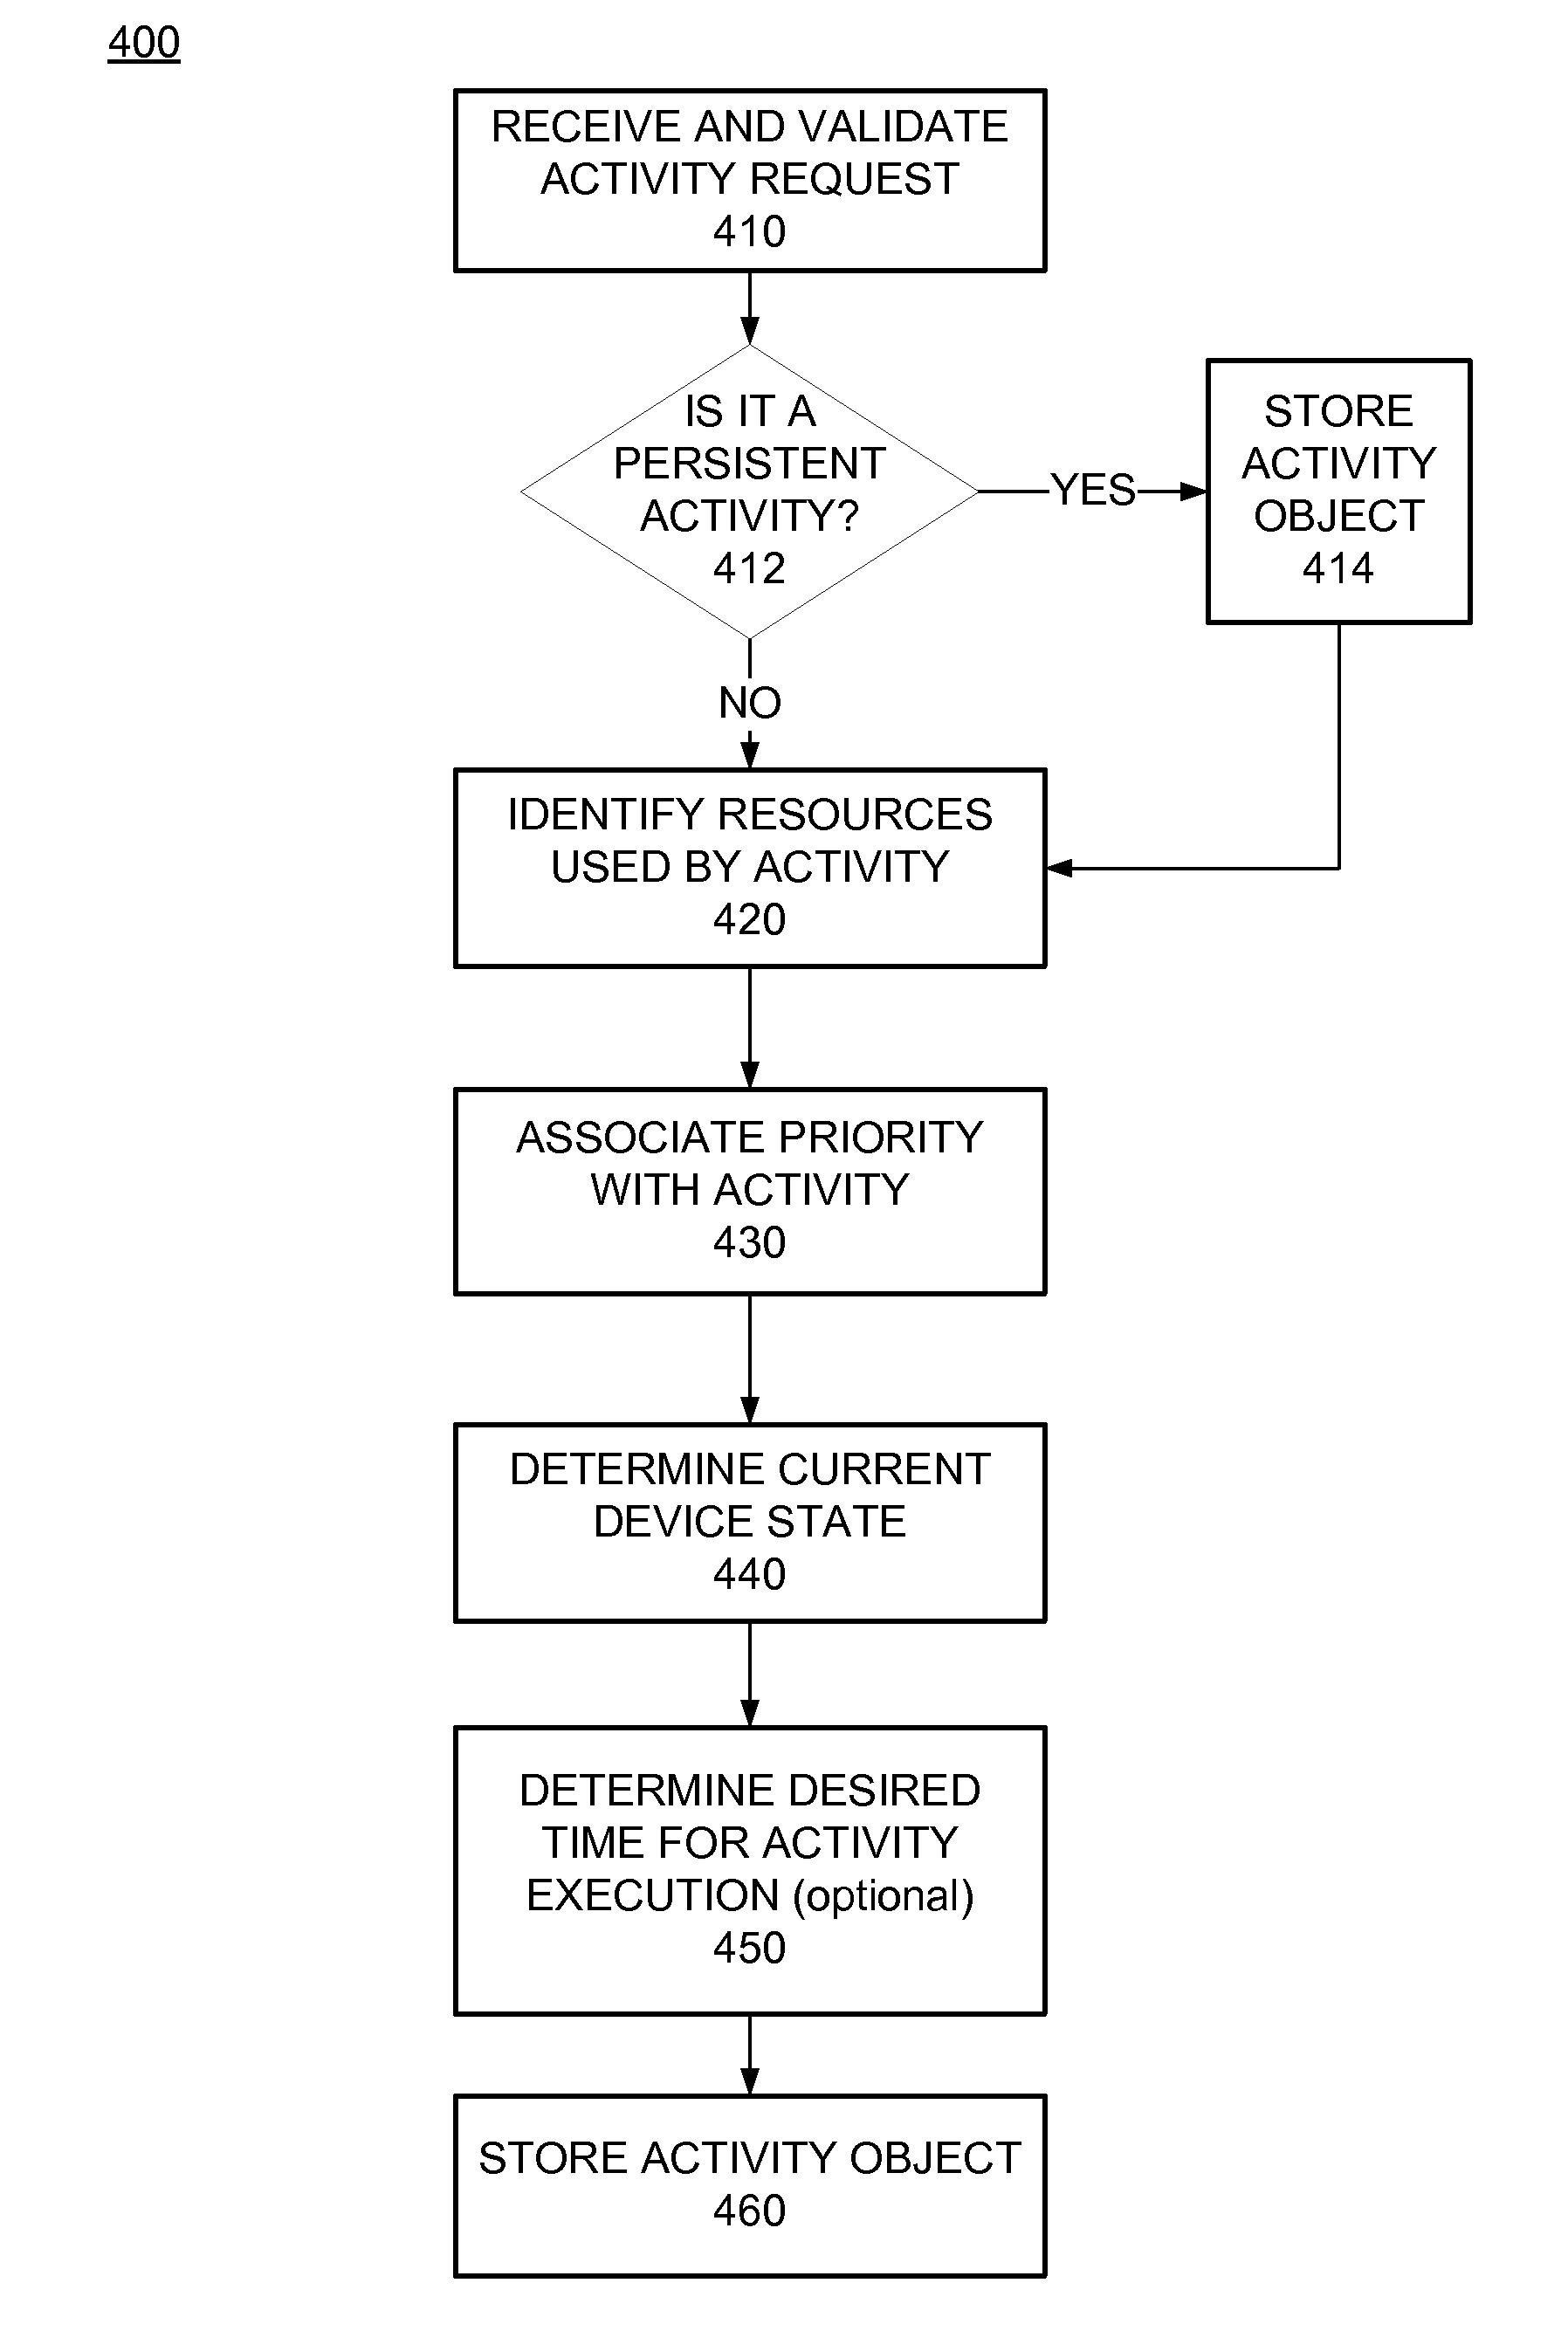 Mobile Computing Device Activity Manager